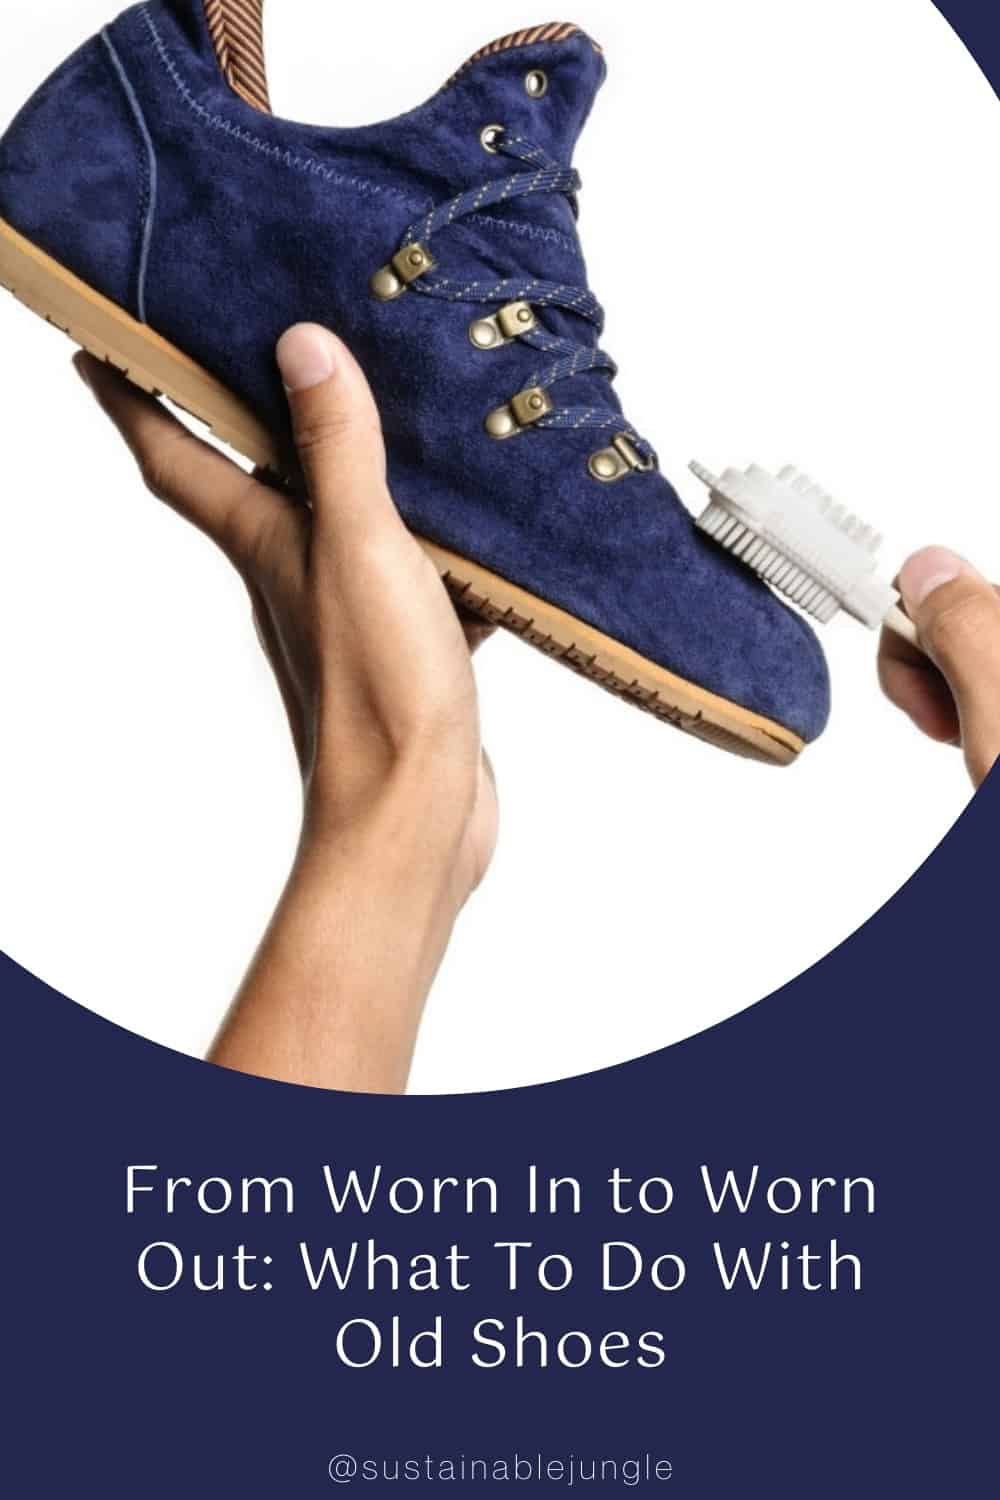 Worn Out: What To Do With Old Shoes #whattodowitholdshoes #whattodowitholdwonroutshoes #ideasforoldshoes #sustainablejungle Image by Norasit Kaewsai via Getty Images on Canva Pro